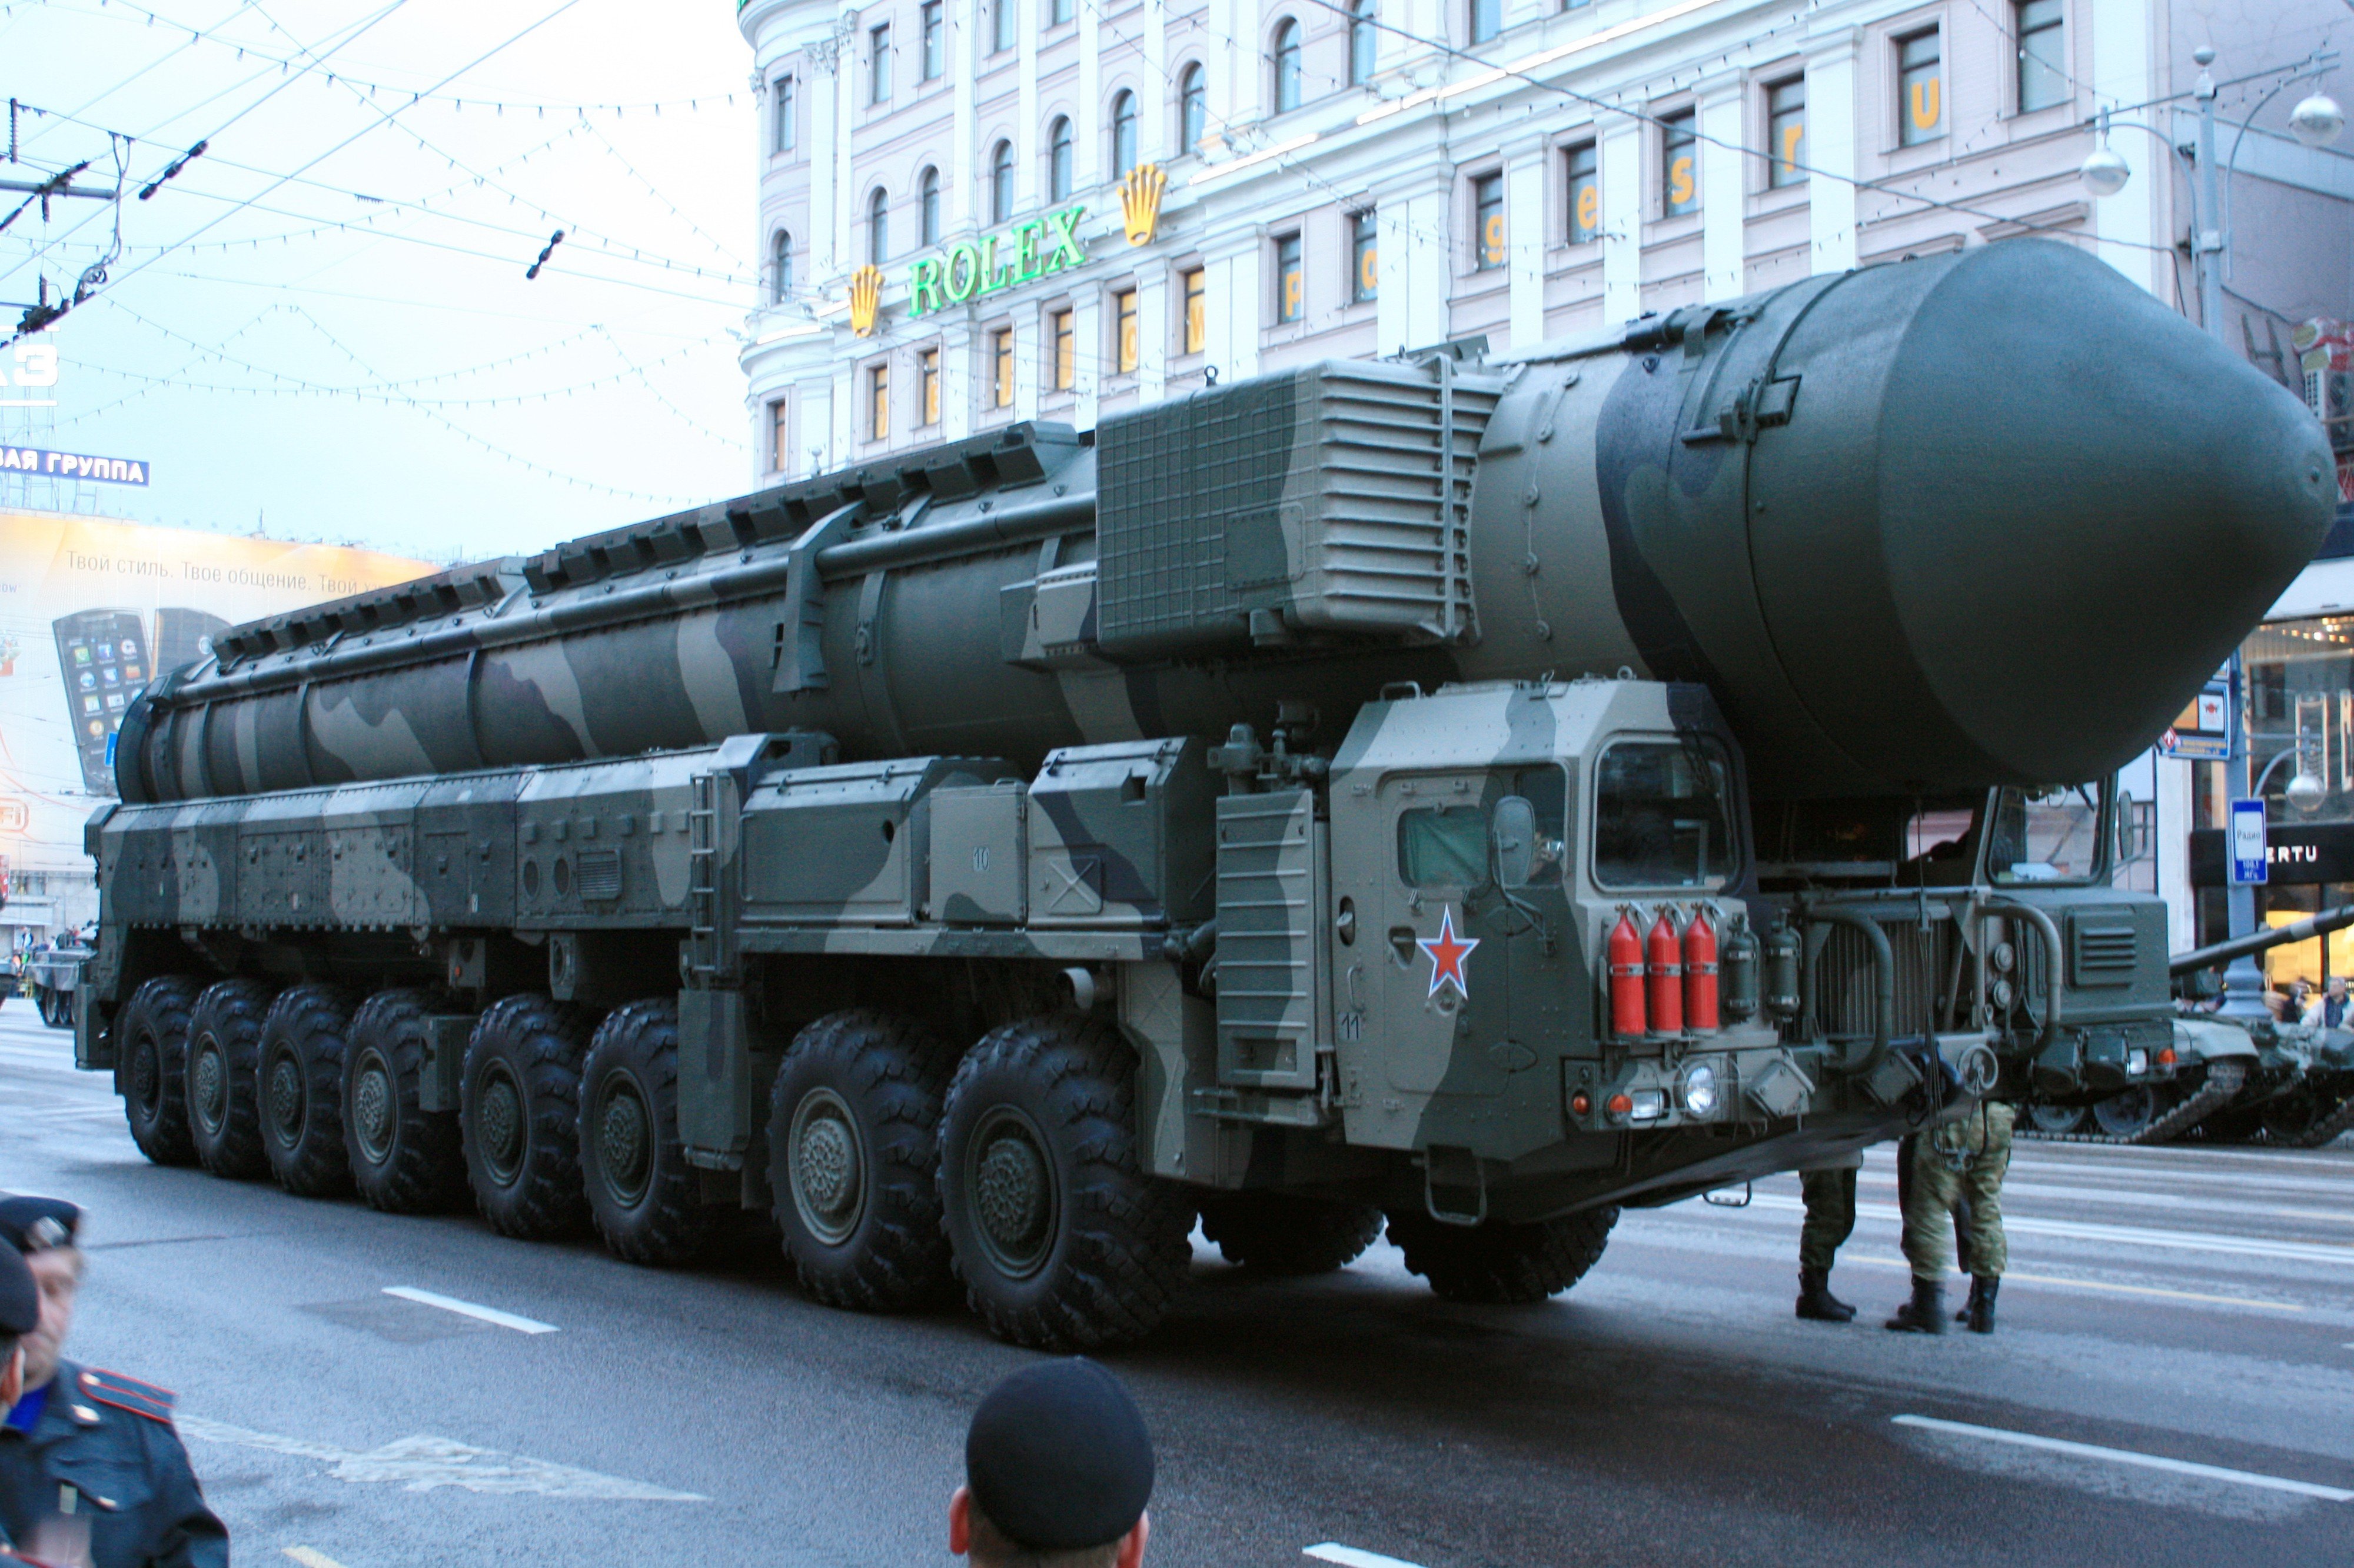 nuclear, Ss 27, Vehicle, Military, Army, Attack, Russian, Red, Star, Russia, Topol m, Missile, 4000x2665 Wallpaper